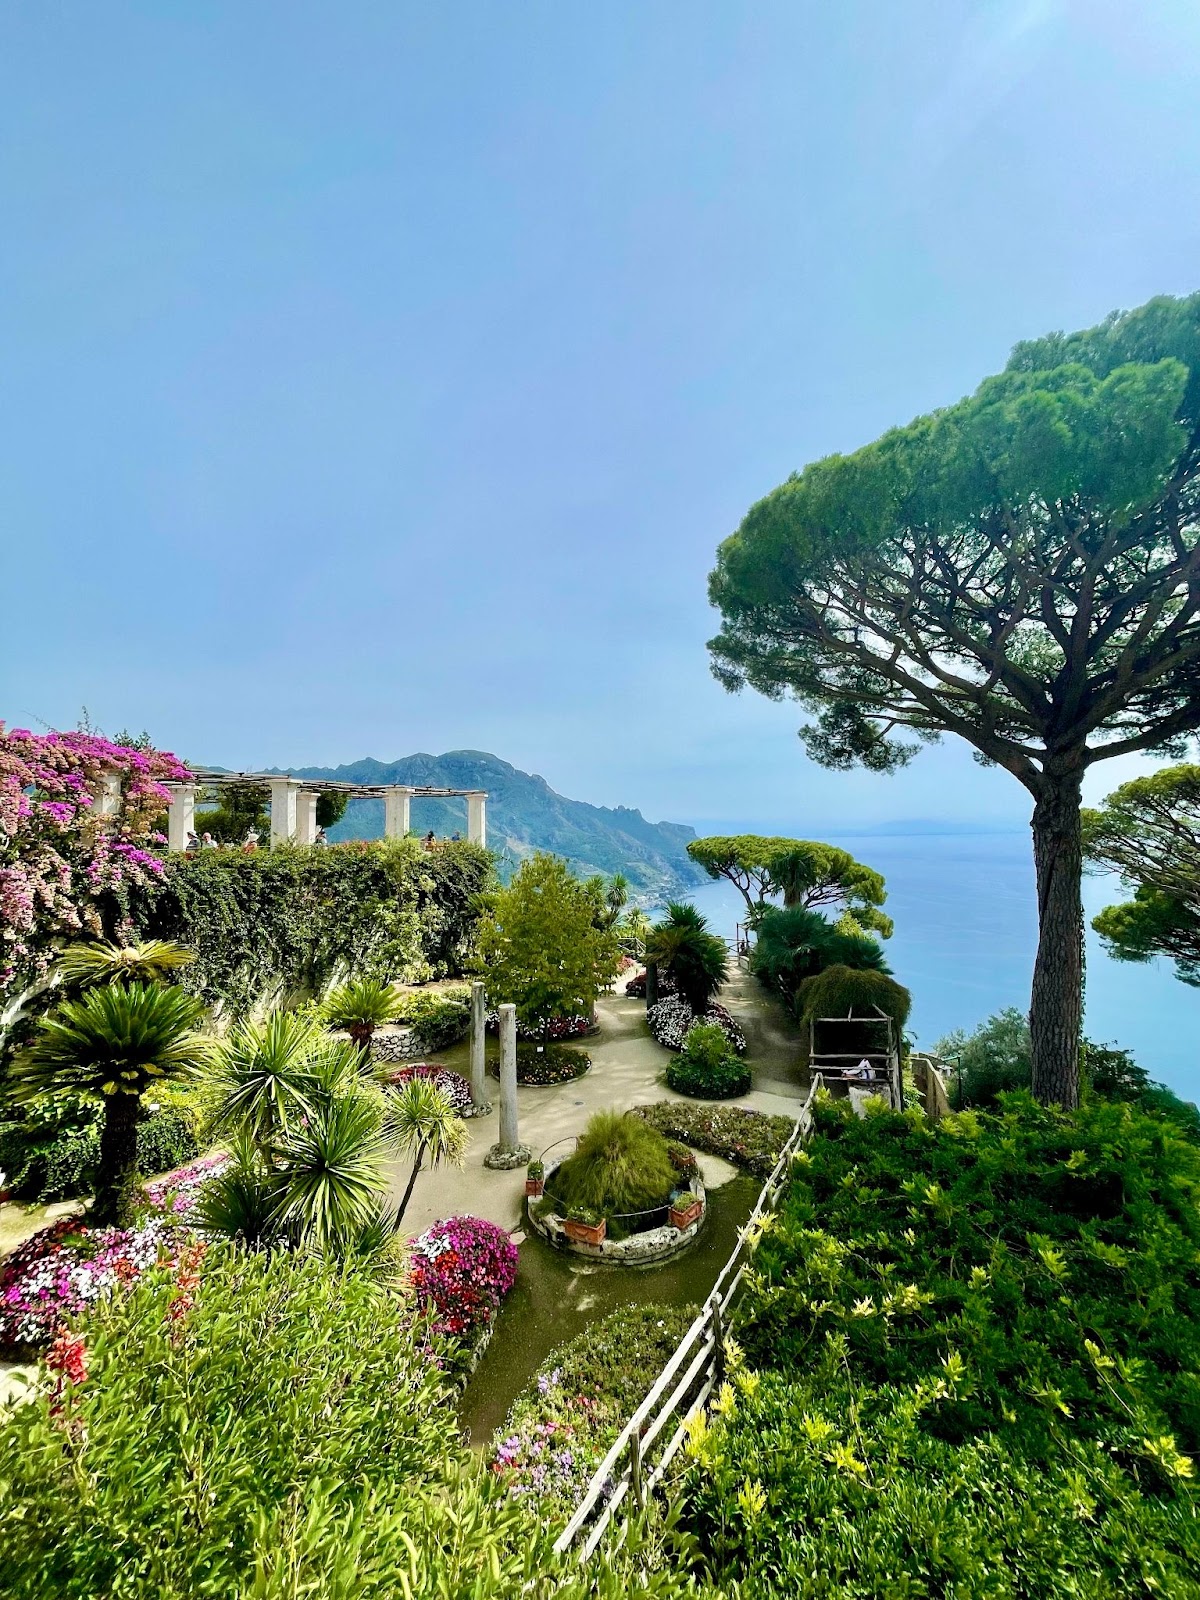 A Complete Guide to the Amalfi Coast, Italy - Trips to Uncover